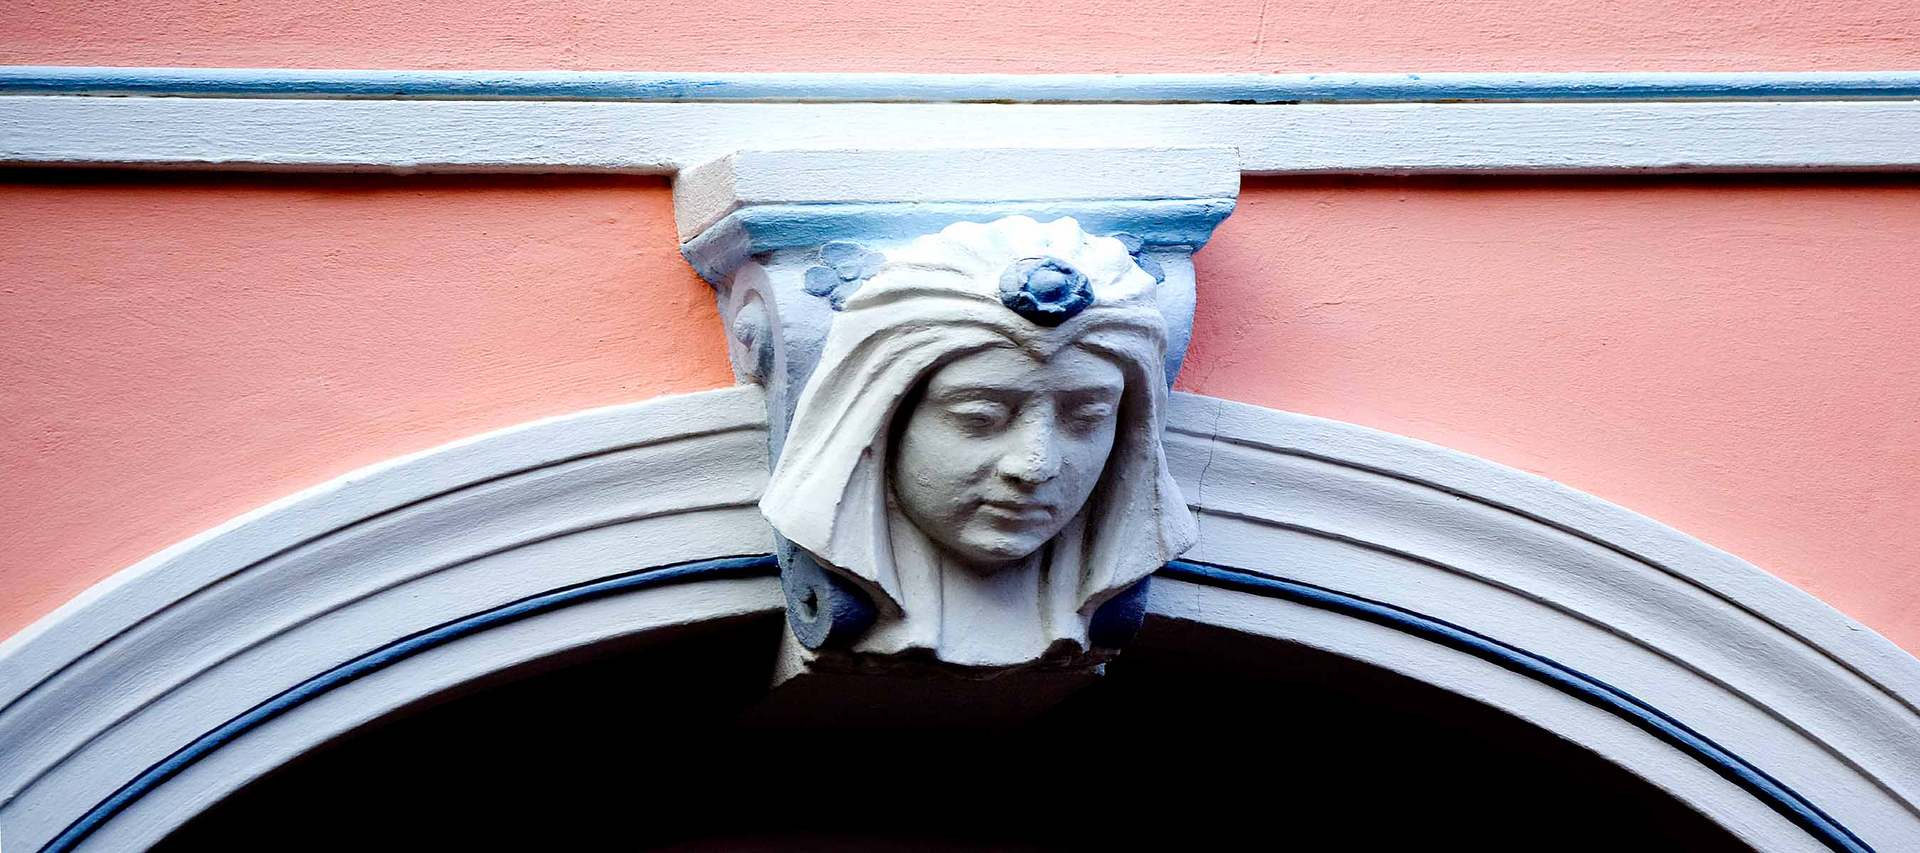 "Deco Detail The Head and Arch"   <br> South Beach-Miami